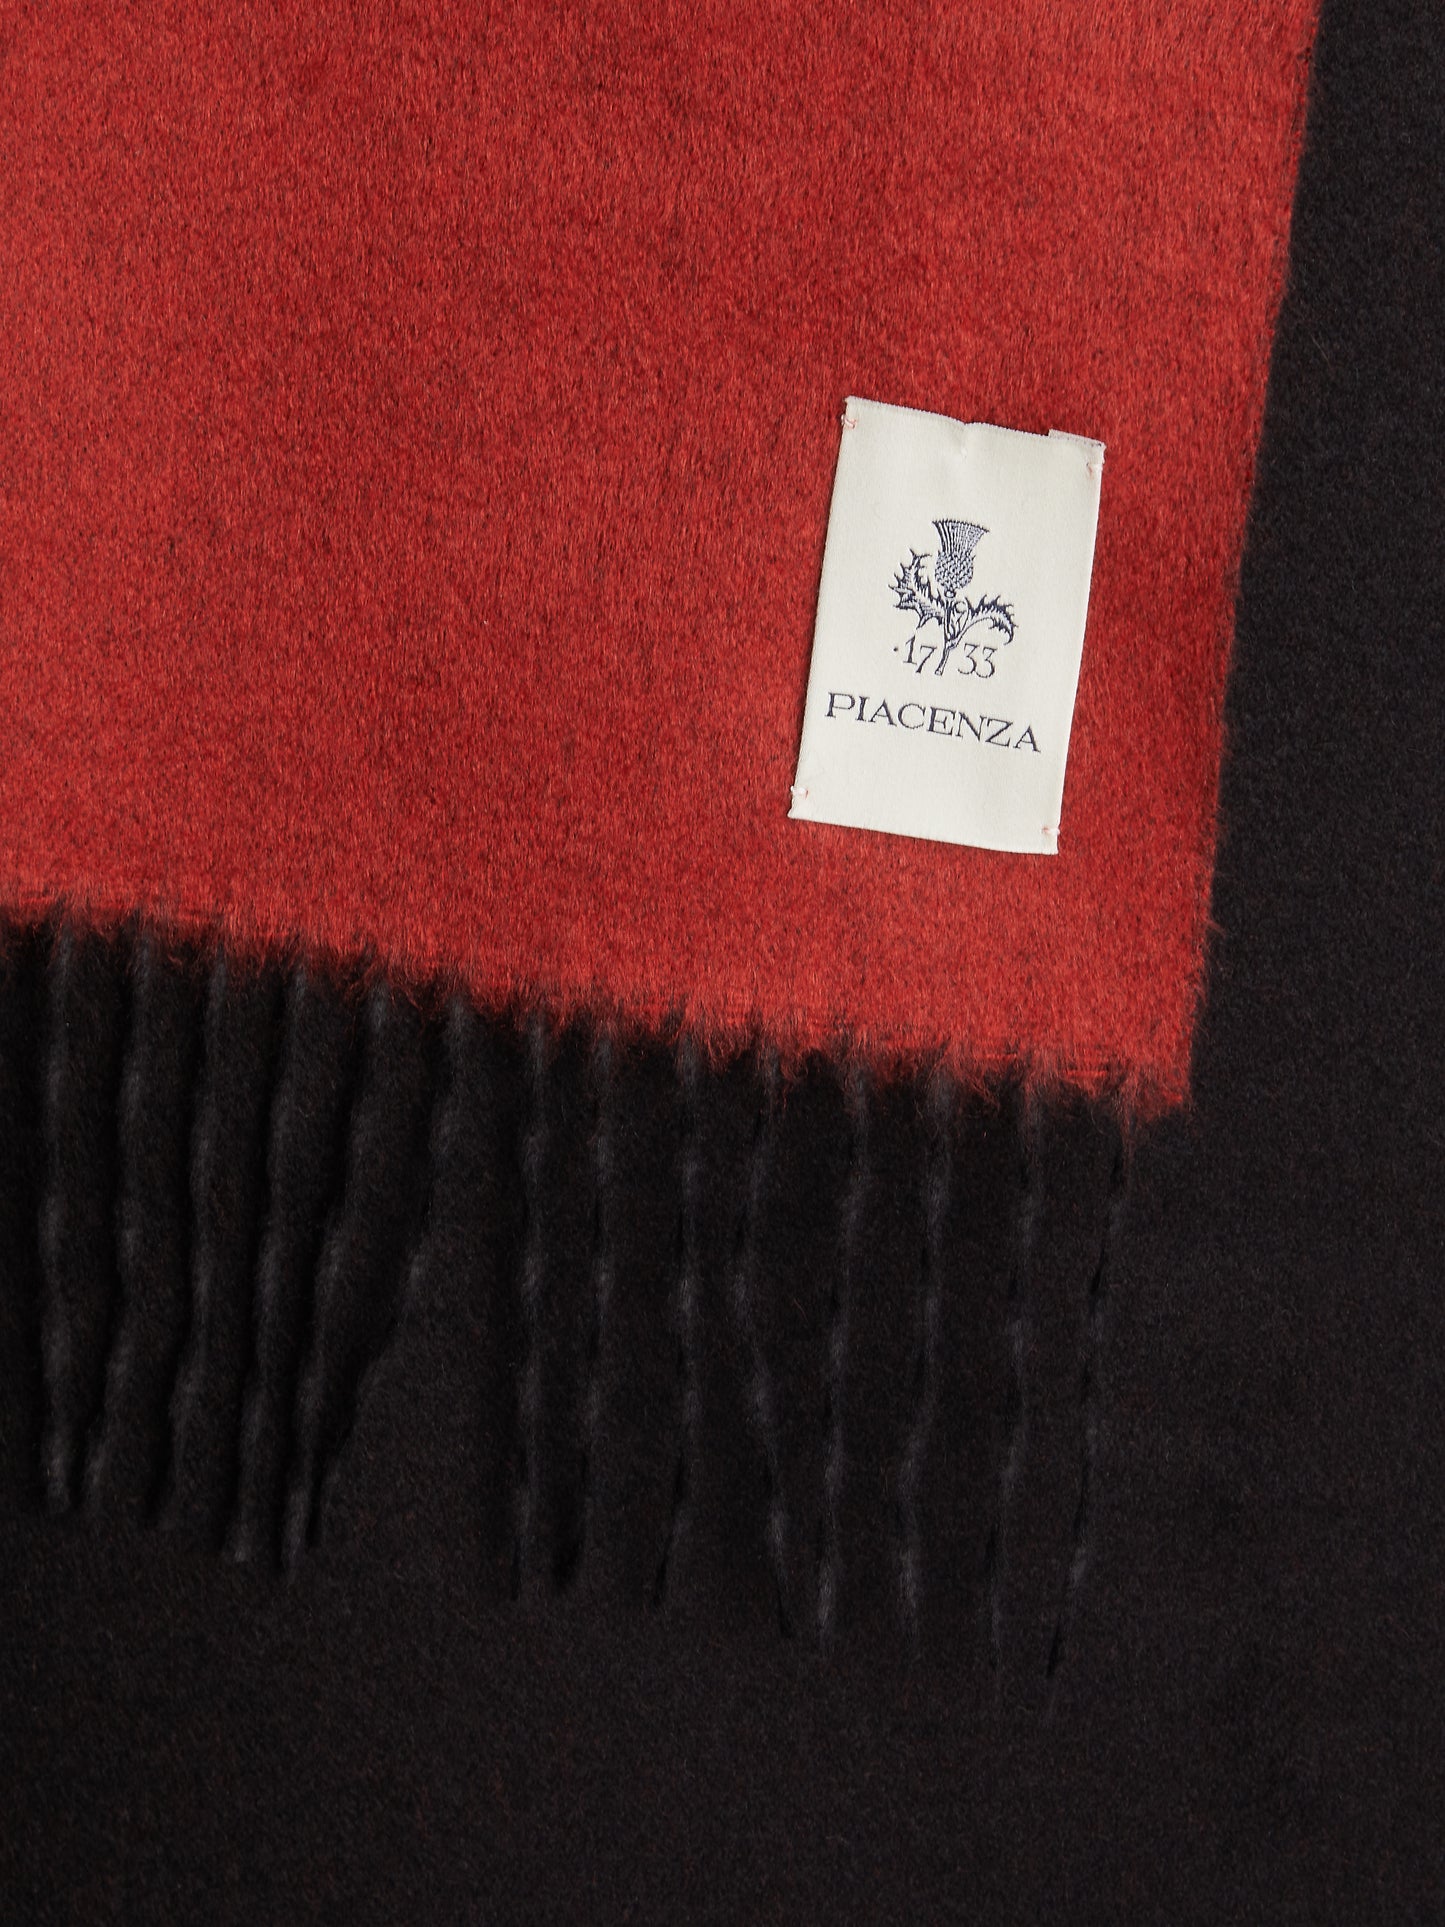 MIRROR - Two-tone red and black cashmere silk scarf